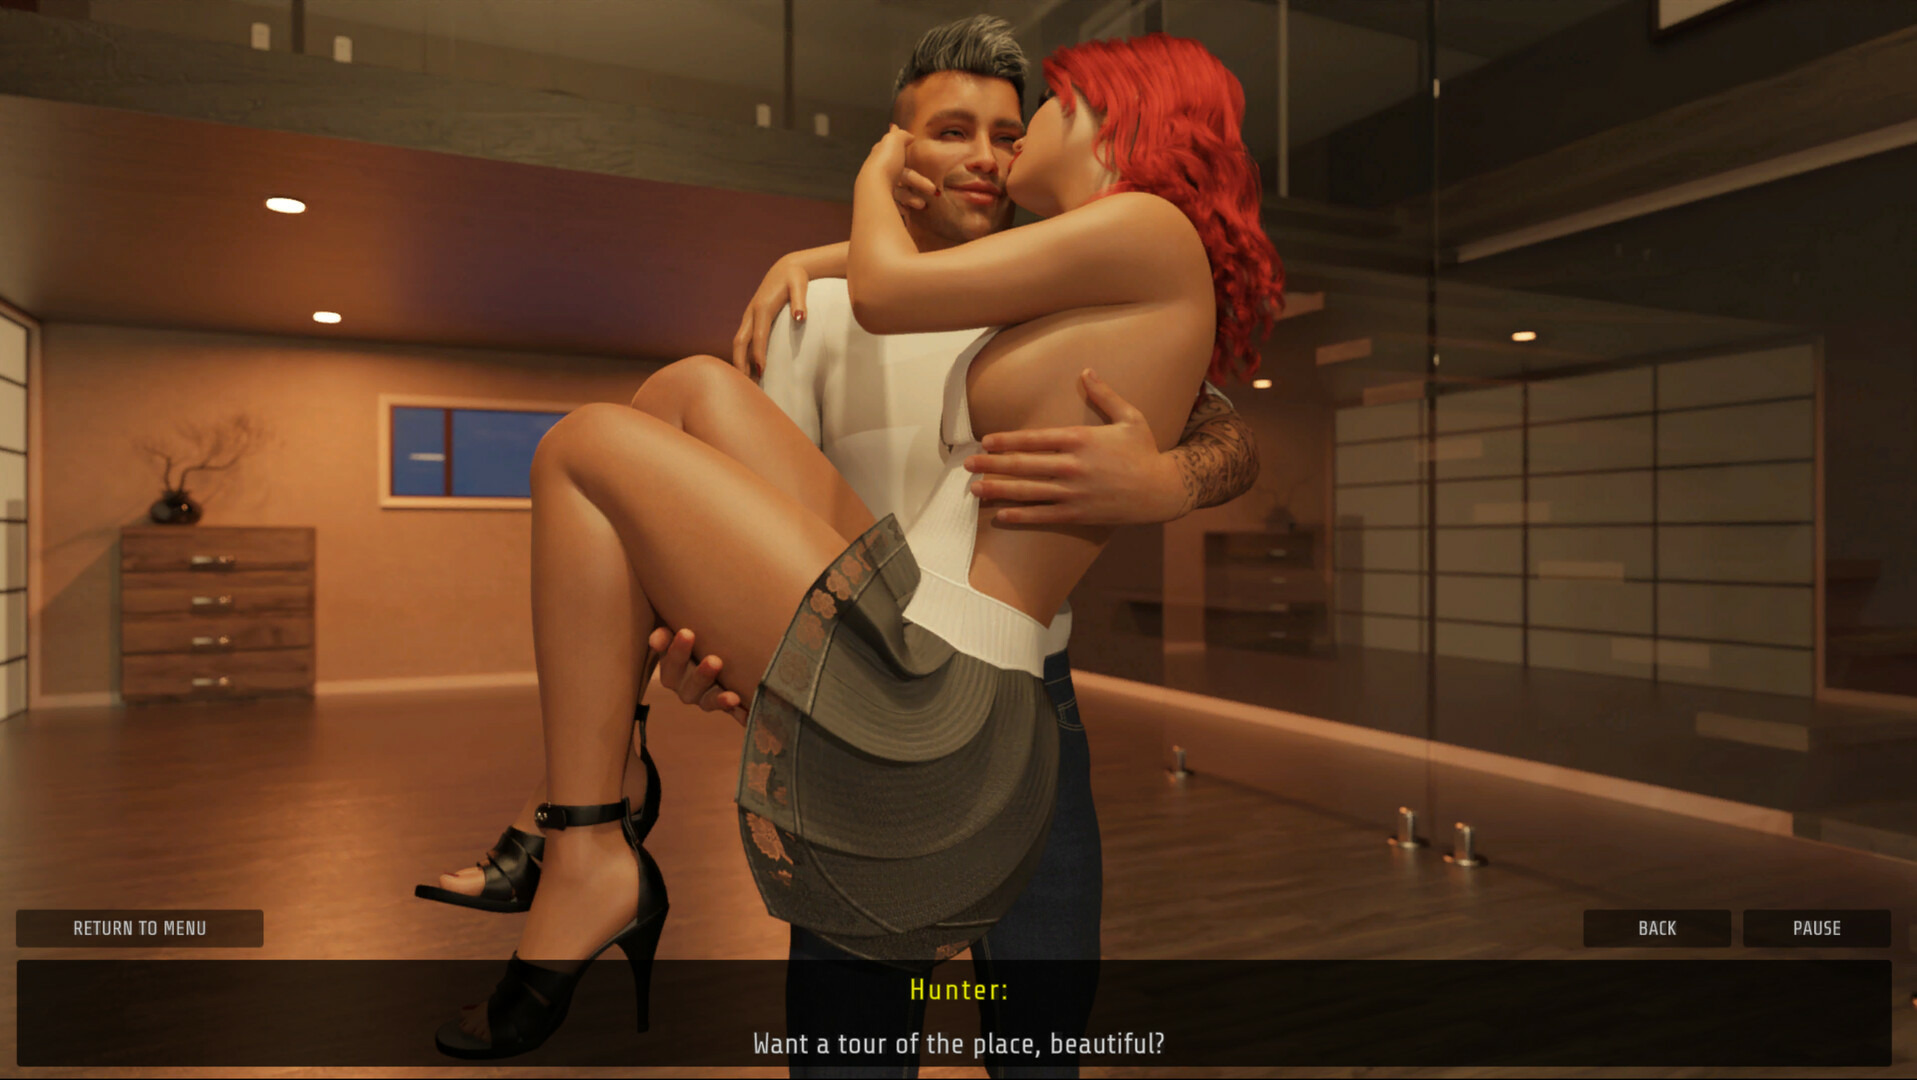 Sex Story - Ruby and Hunter - Episode 2 Steam CD Key 1.92 usd